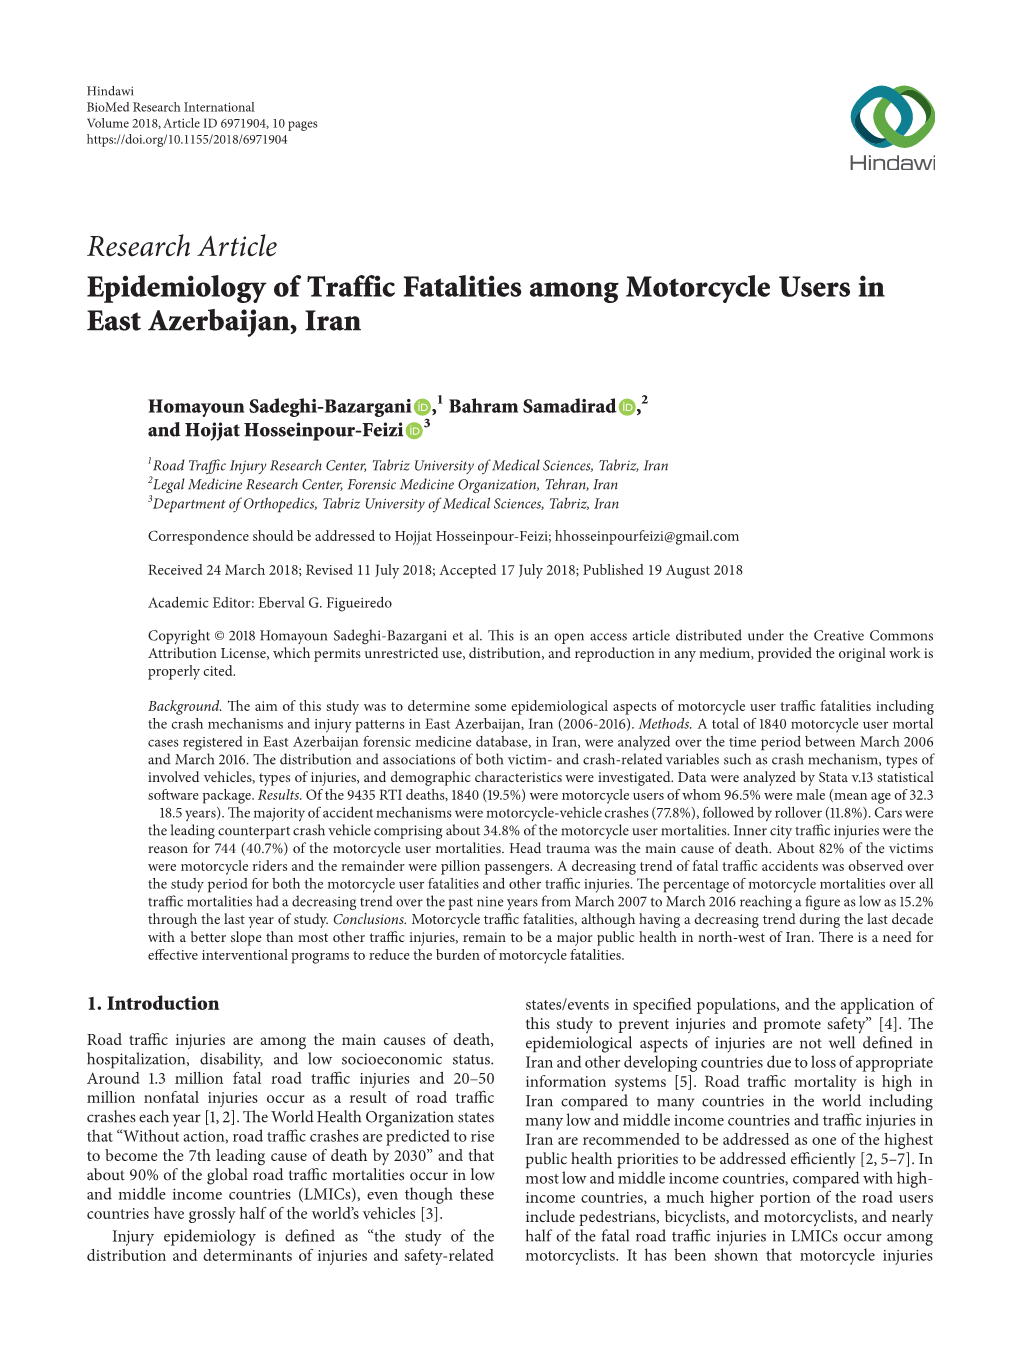 Research Article Epidemiology of Traffic Fatalities Among Motorcycle Users in East Azerbaijan, Iran